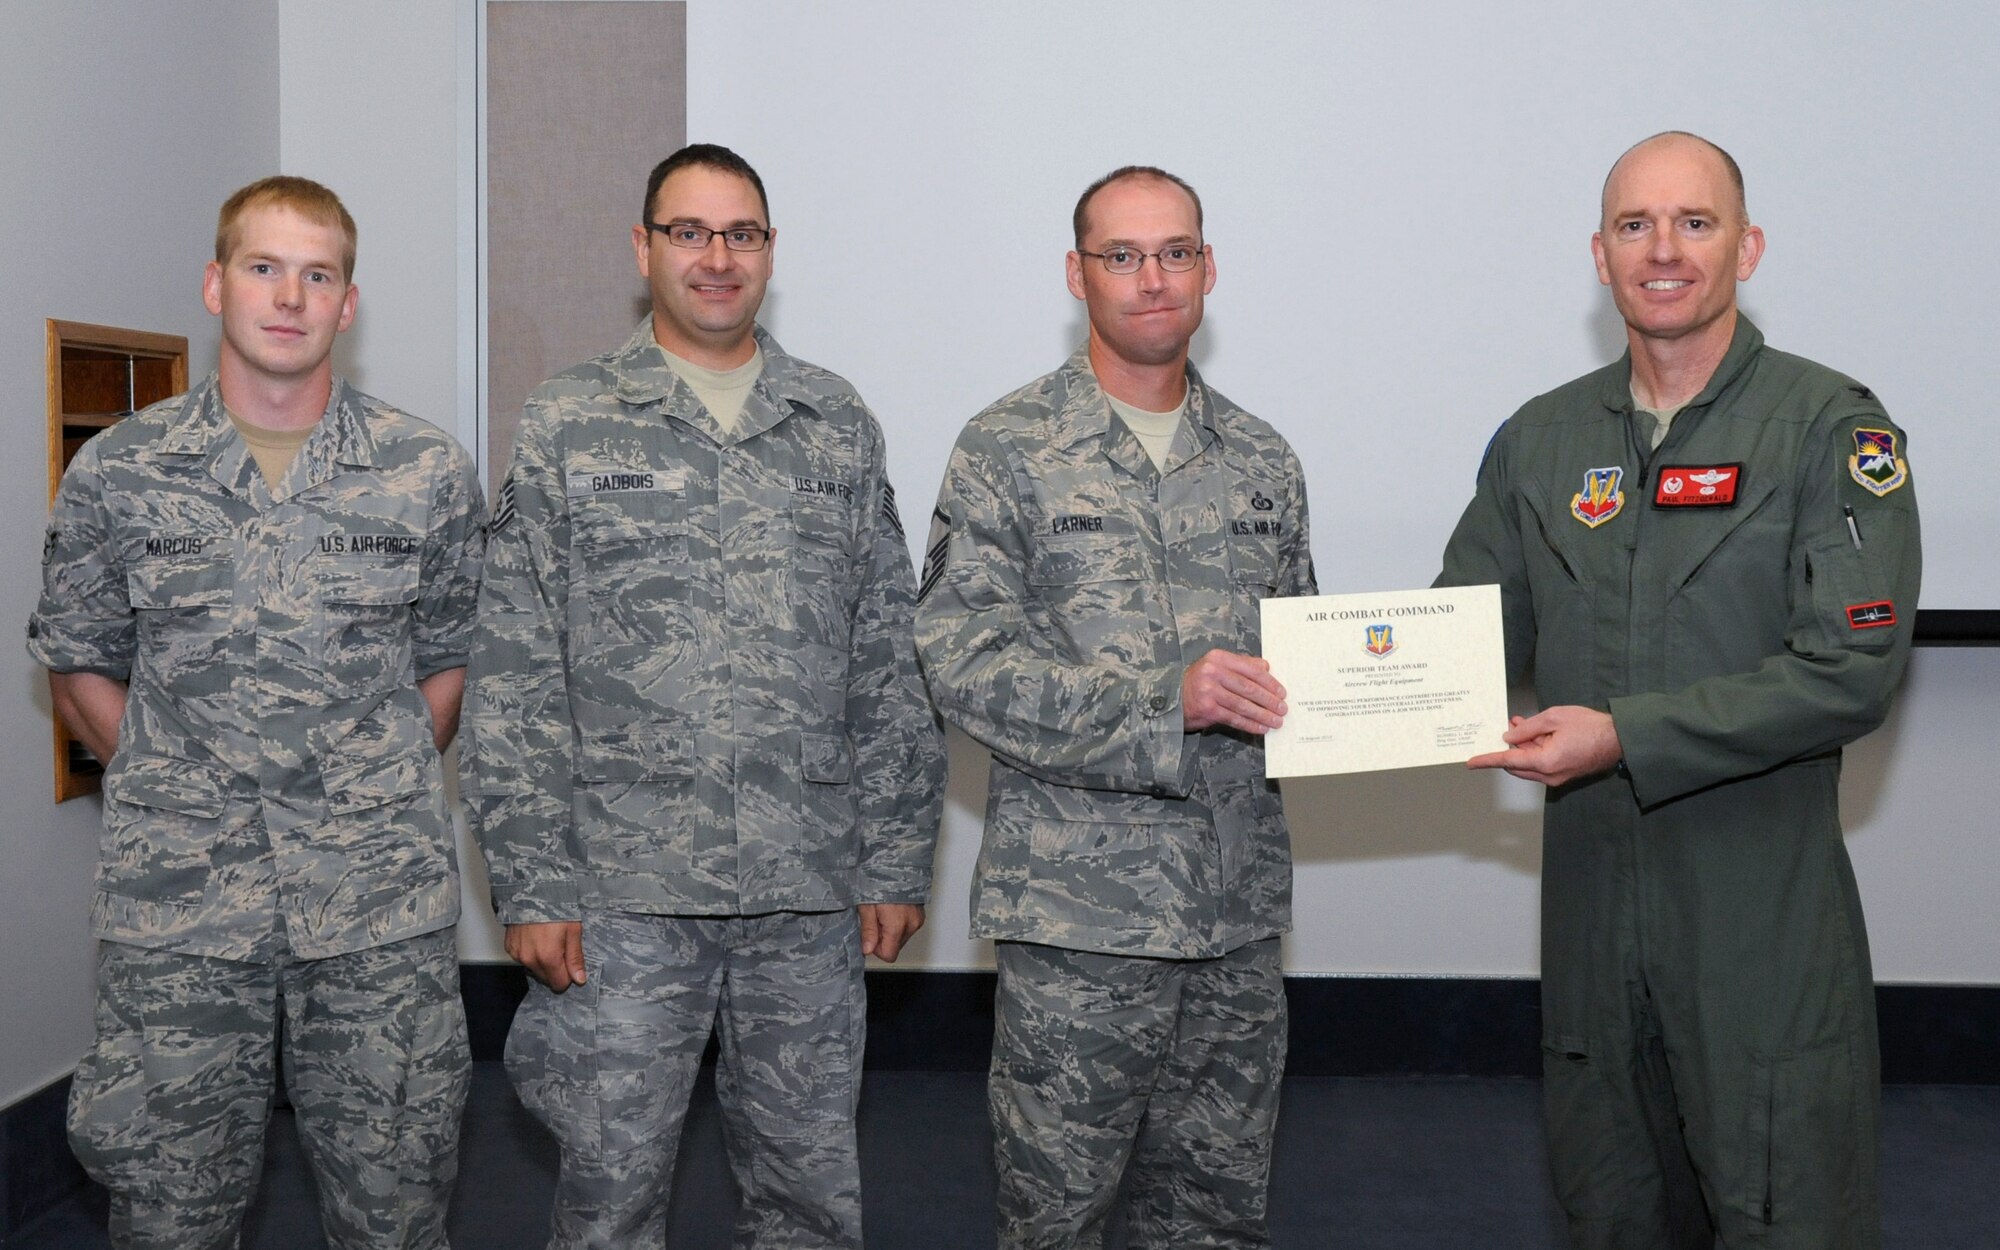 Oregon Air National Guard Col. Paul T. Fitzgerald, 142nd Fighter Wing commander, right, presents the Air Combat Command Superior Team Award to the Aircrew Flight Equipment team in attendance for a briefing following the Unit Effectiveness Inspection, Aug. 18, 2015, Portland Air National Guard Base, Ore. The three members representing the entire team assigned to the 142nd Fighter Wing Operations Group are (left-right) Airman 1st Class Cory Marcus, Tech. Sgt. Gregory Gadbois and Master Sgt. Mike Larner. (U.S. Air National Guard photo by Master Sgt. Shelly Davison, 142nd Fighter Wing Public Affairs) 